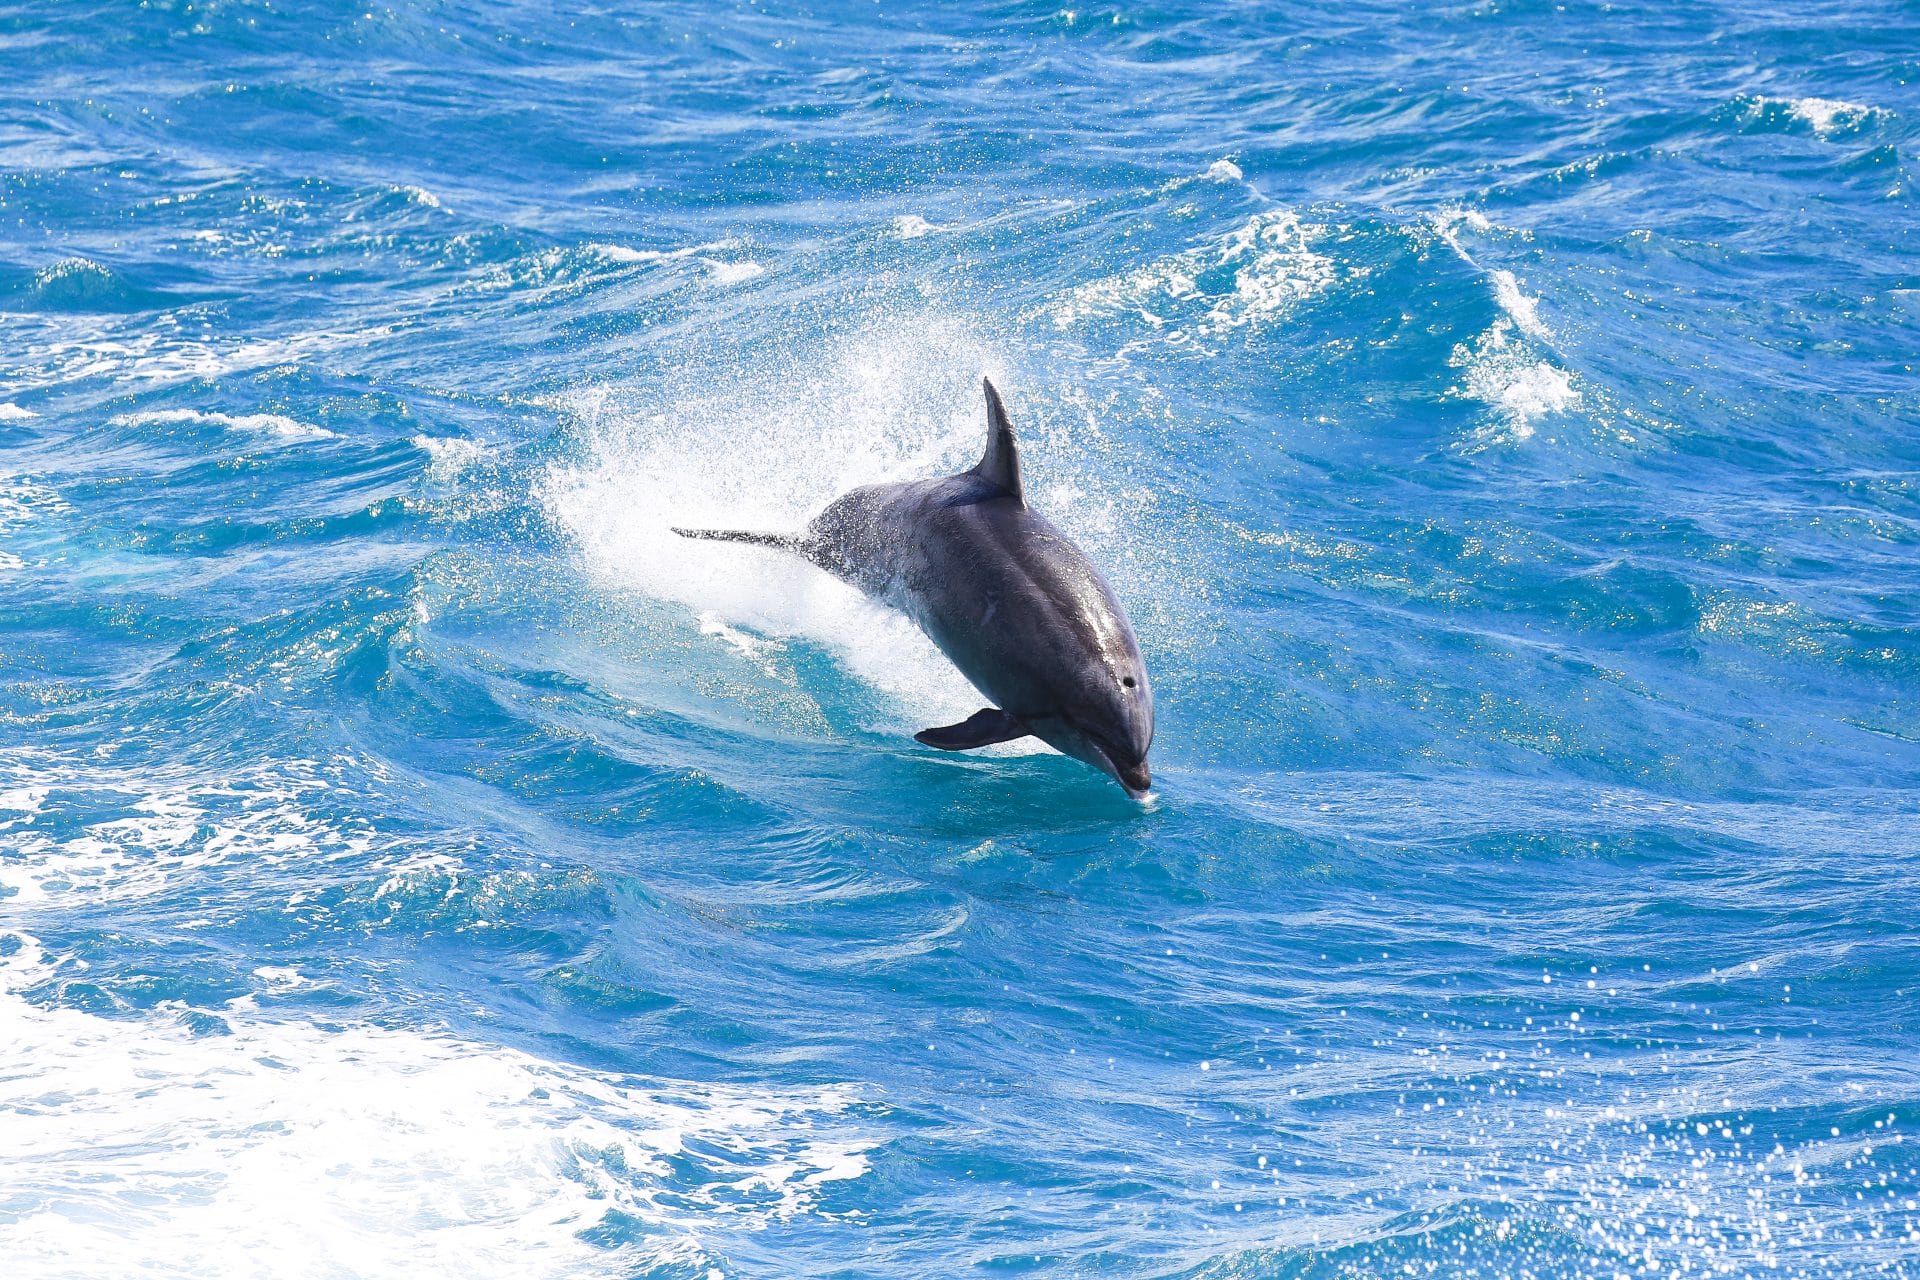 Bottlenose dolphin in Bay of Islands, New Zealand